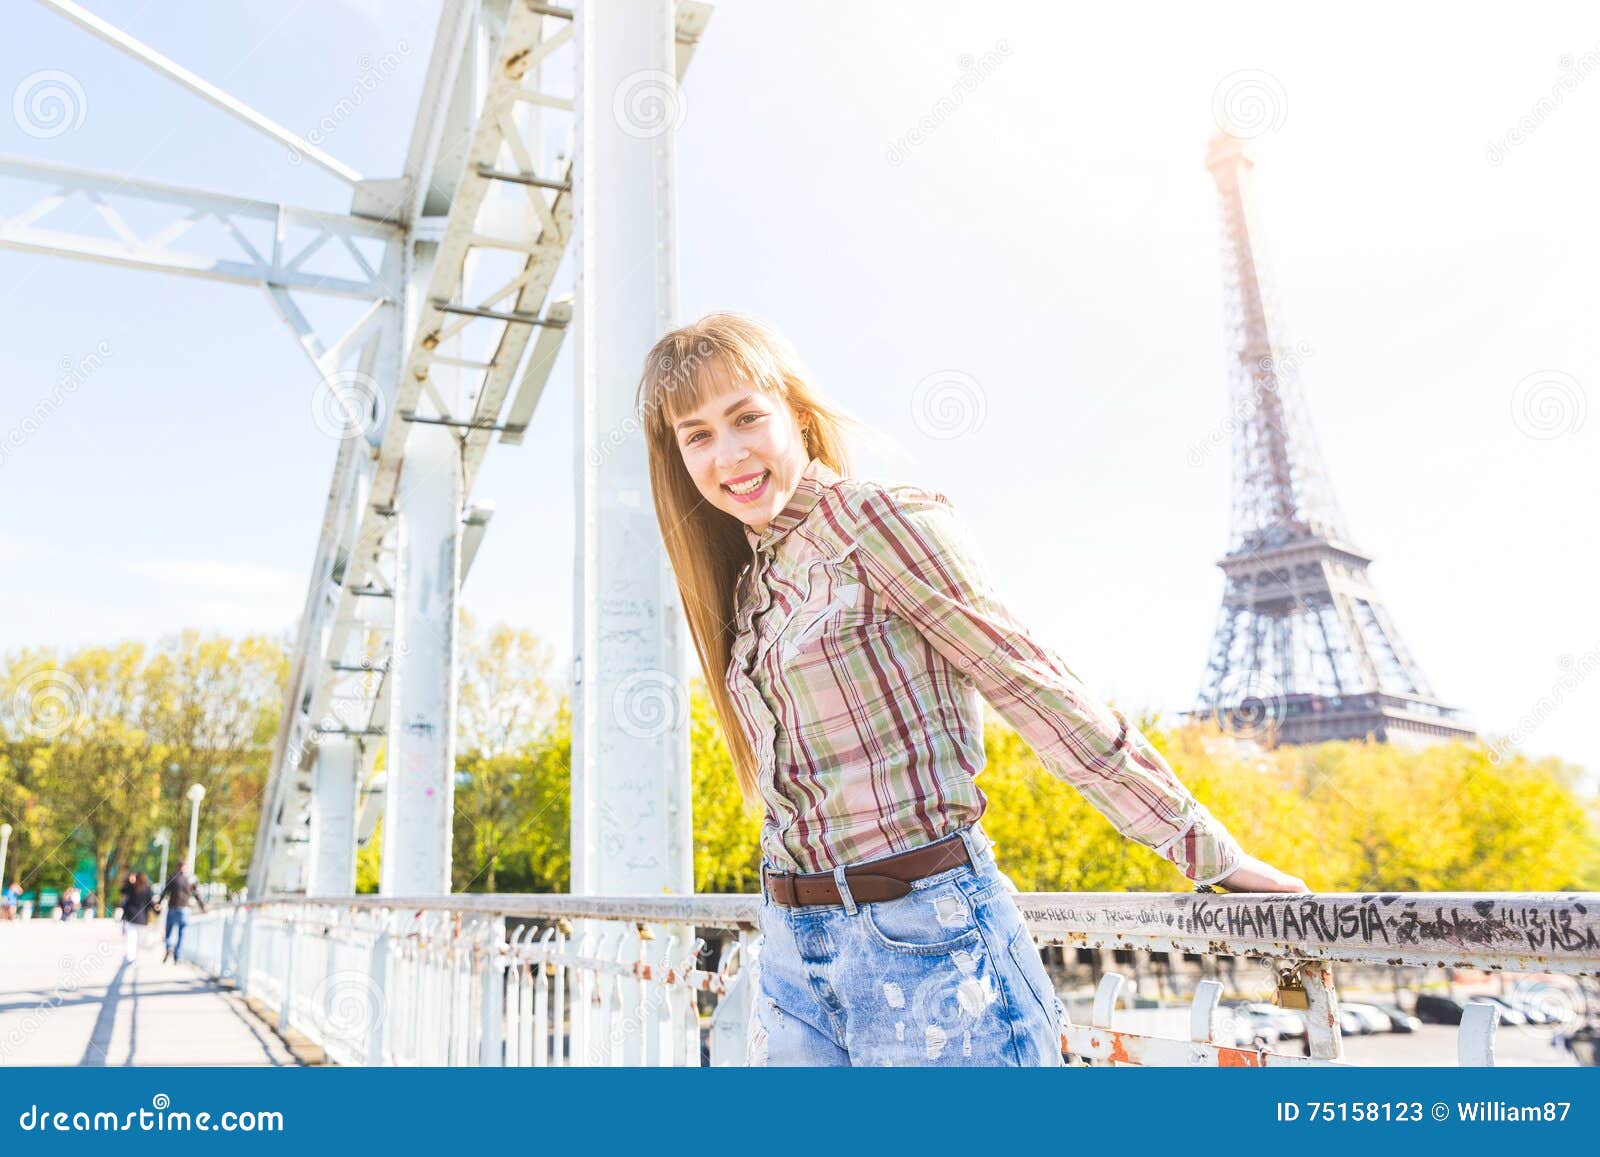 Portrait Of A Girl With Eiffel Tower On Background In Paris Stock Image